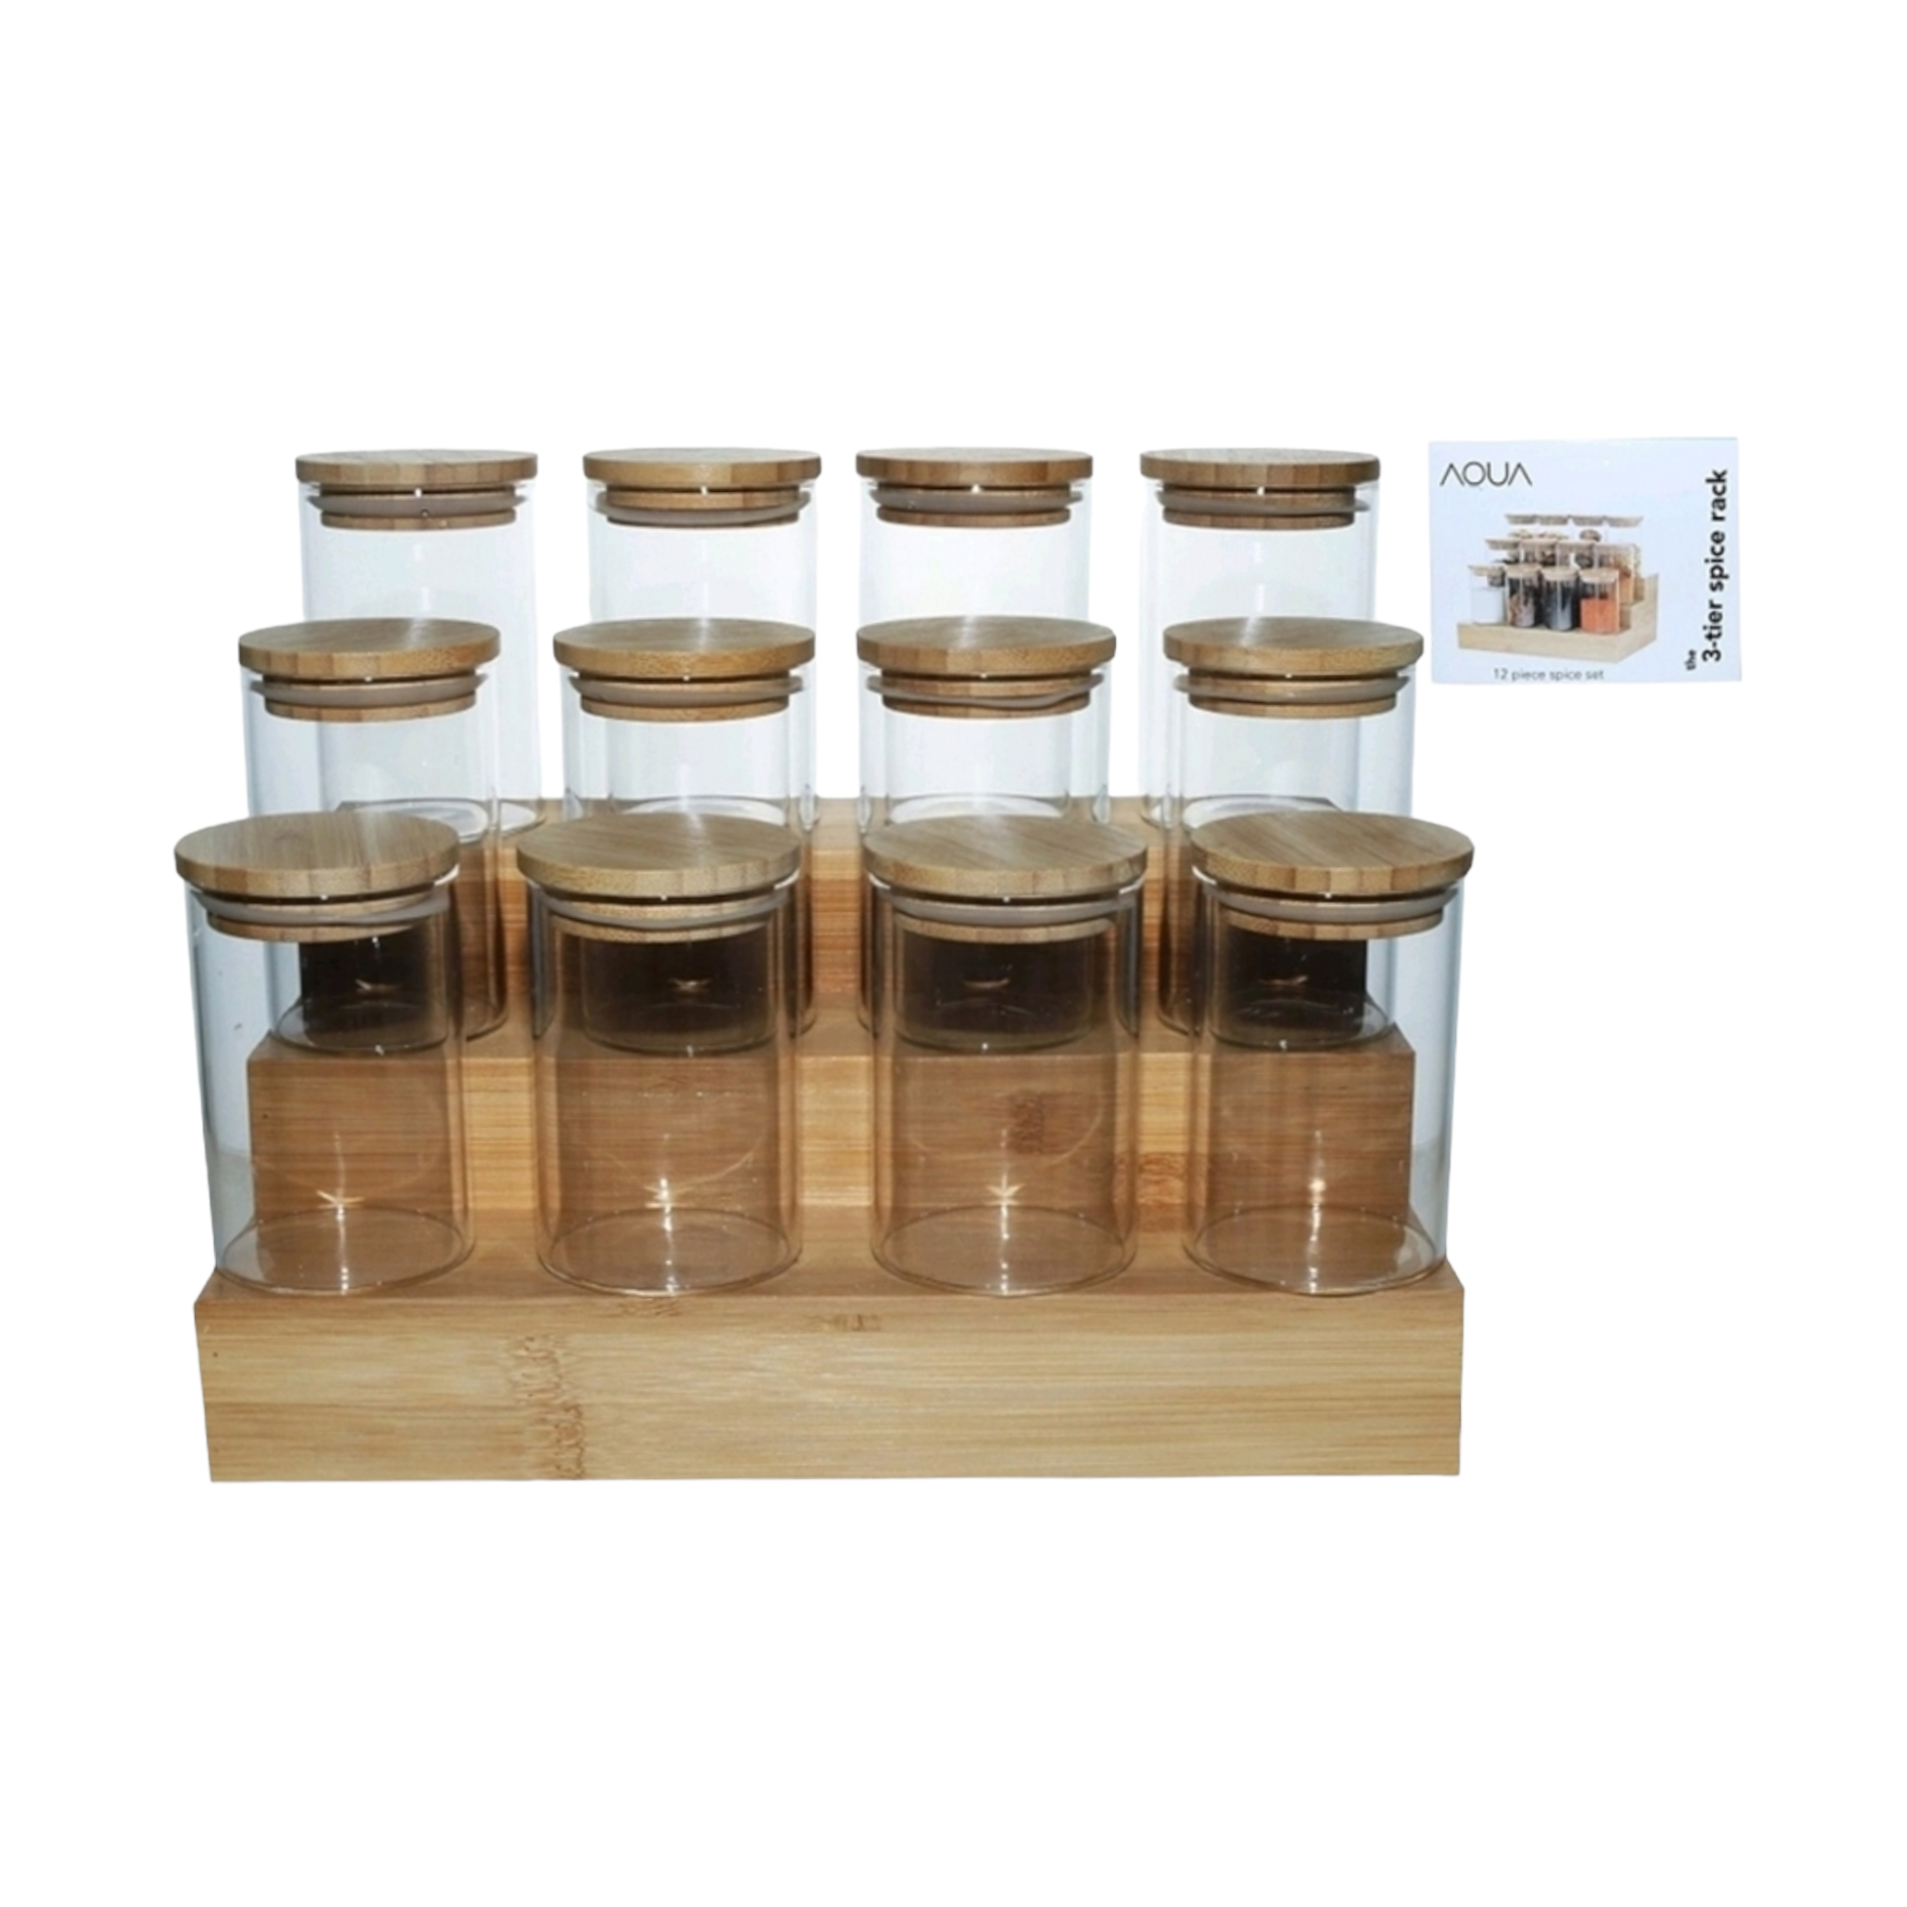 Aqua Spice Jar 200ml with Bamboo Lid 12-Bottle with Stand 27301